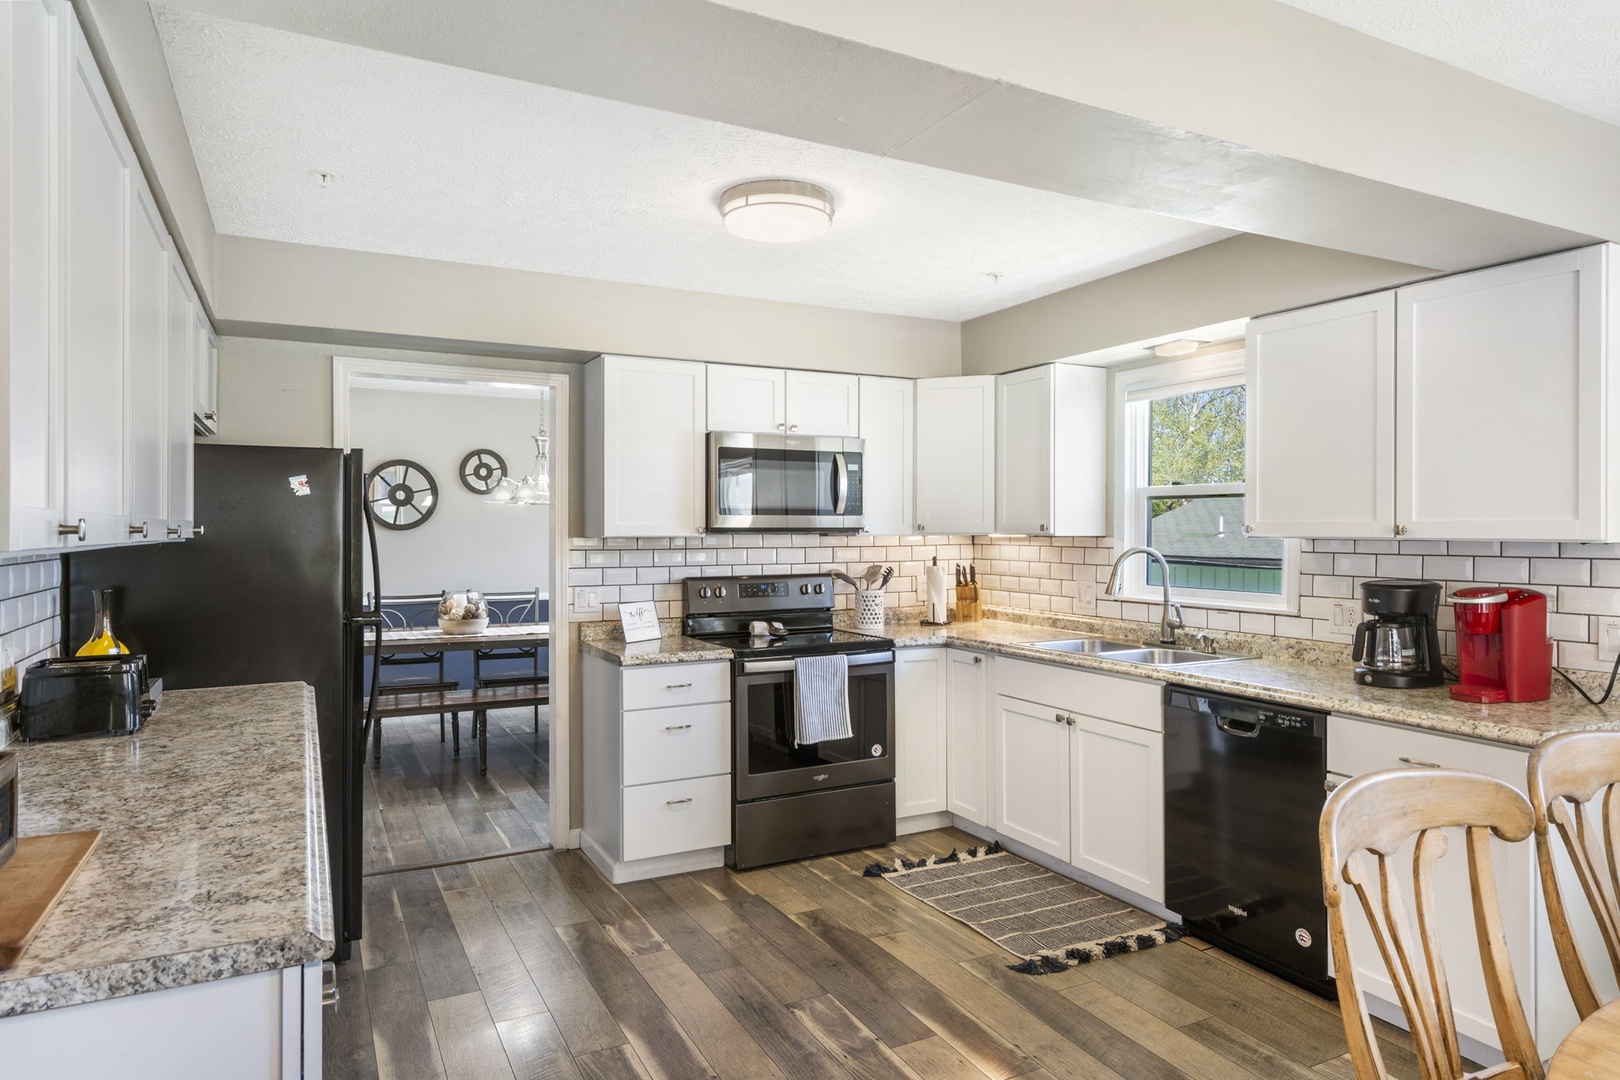 The spacious eat-in kitchen is well equipped with all the comforts of home